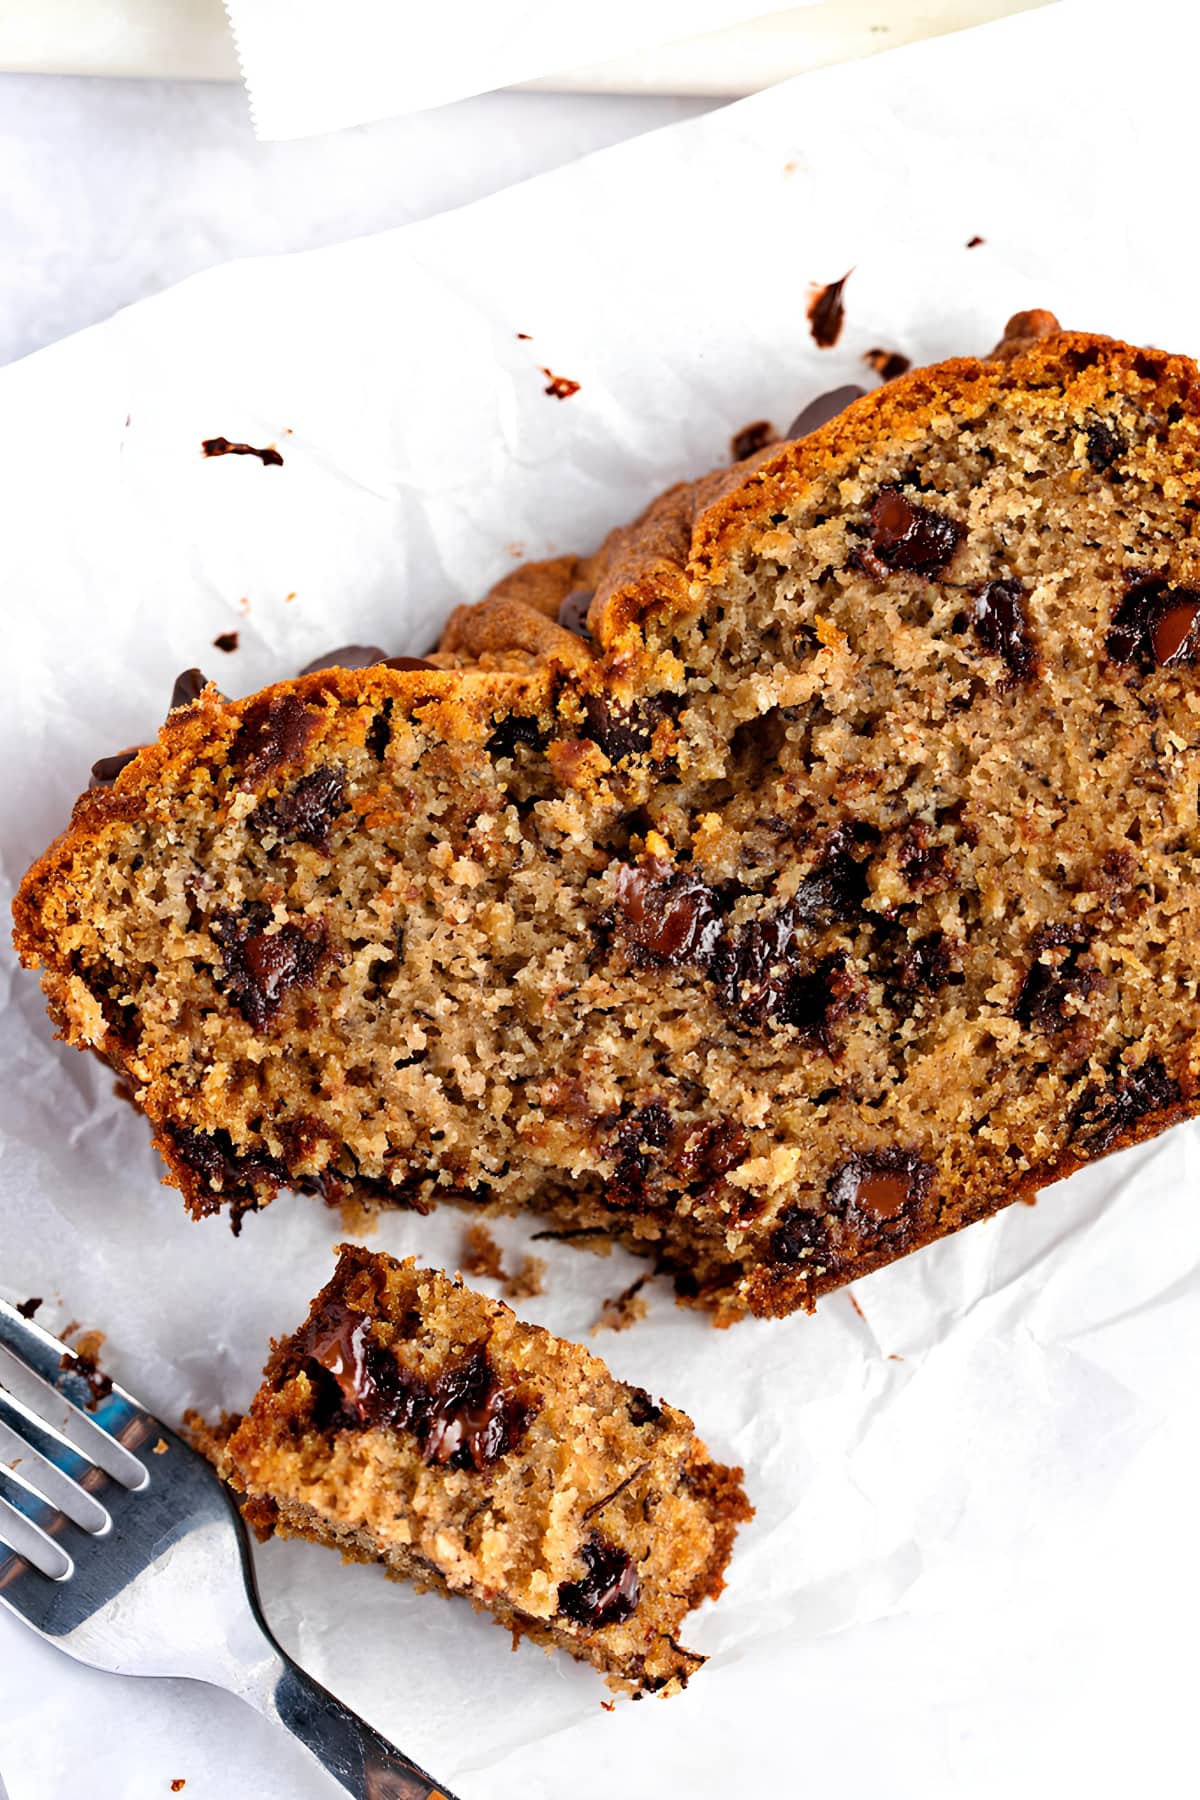 Sweet and Tender Chocolate Chip Banana Bread on a Parchment Paper